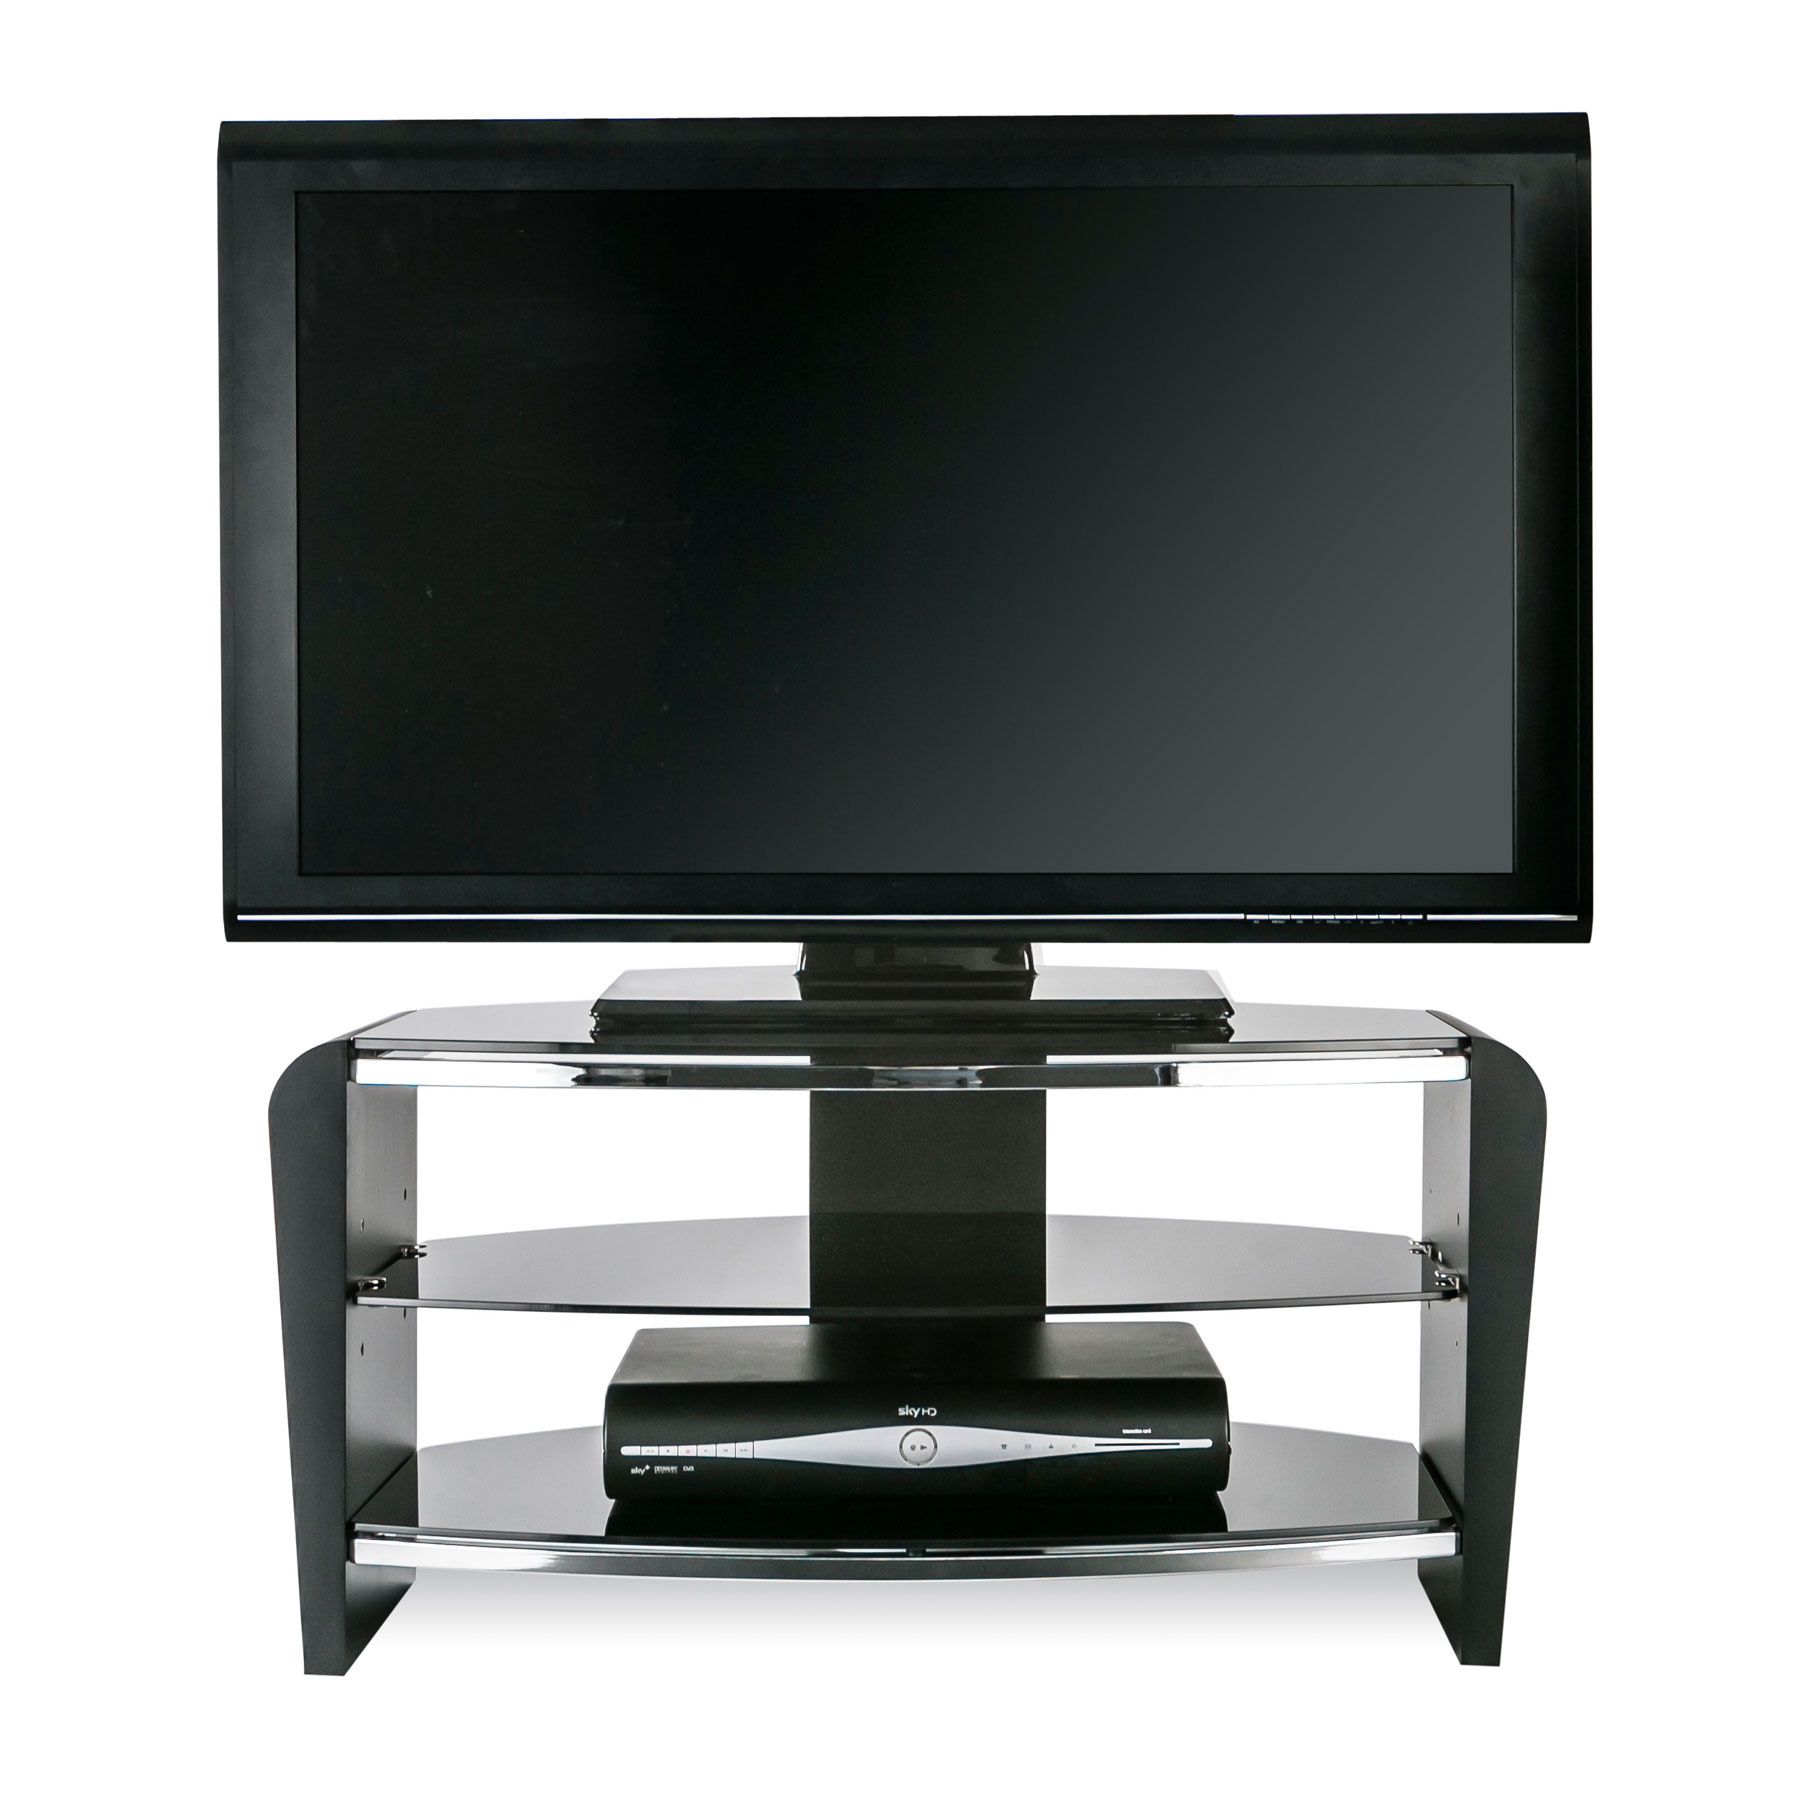 Alphason Francium 80cm Black Tv Stand For Up To 37" Tvs Pertaining To Alphason Tv Cabinet (View 2 of 15)